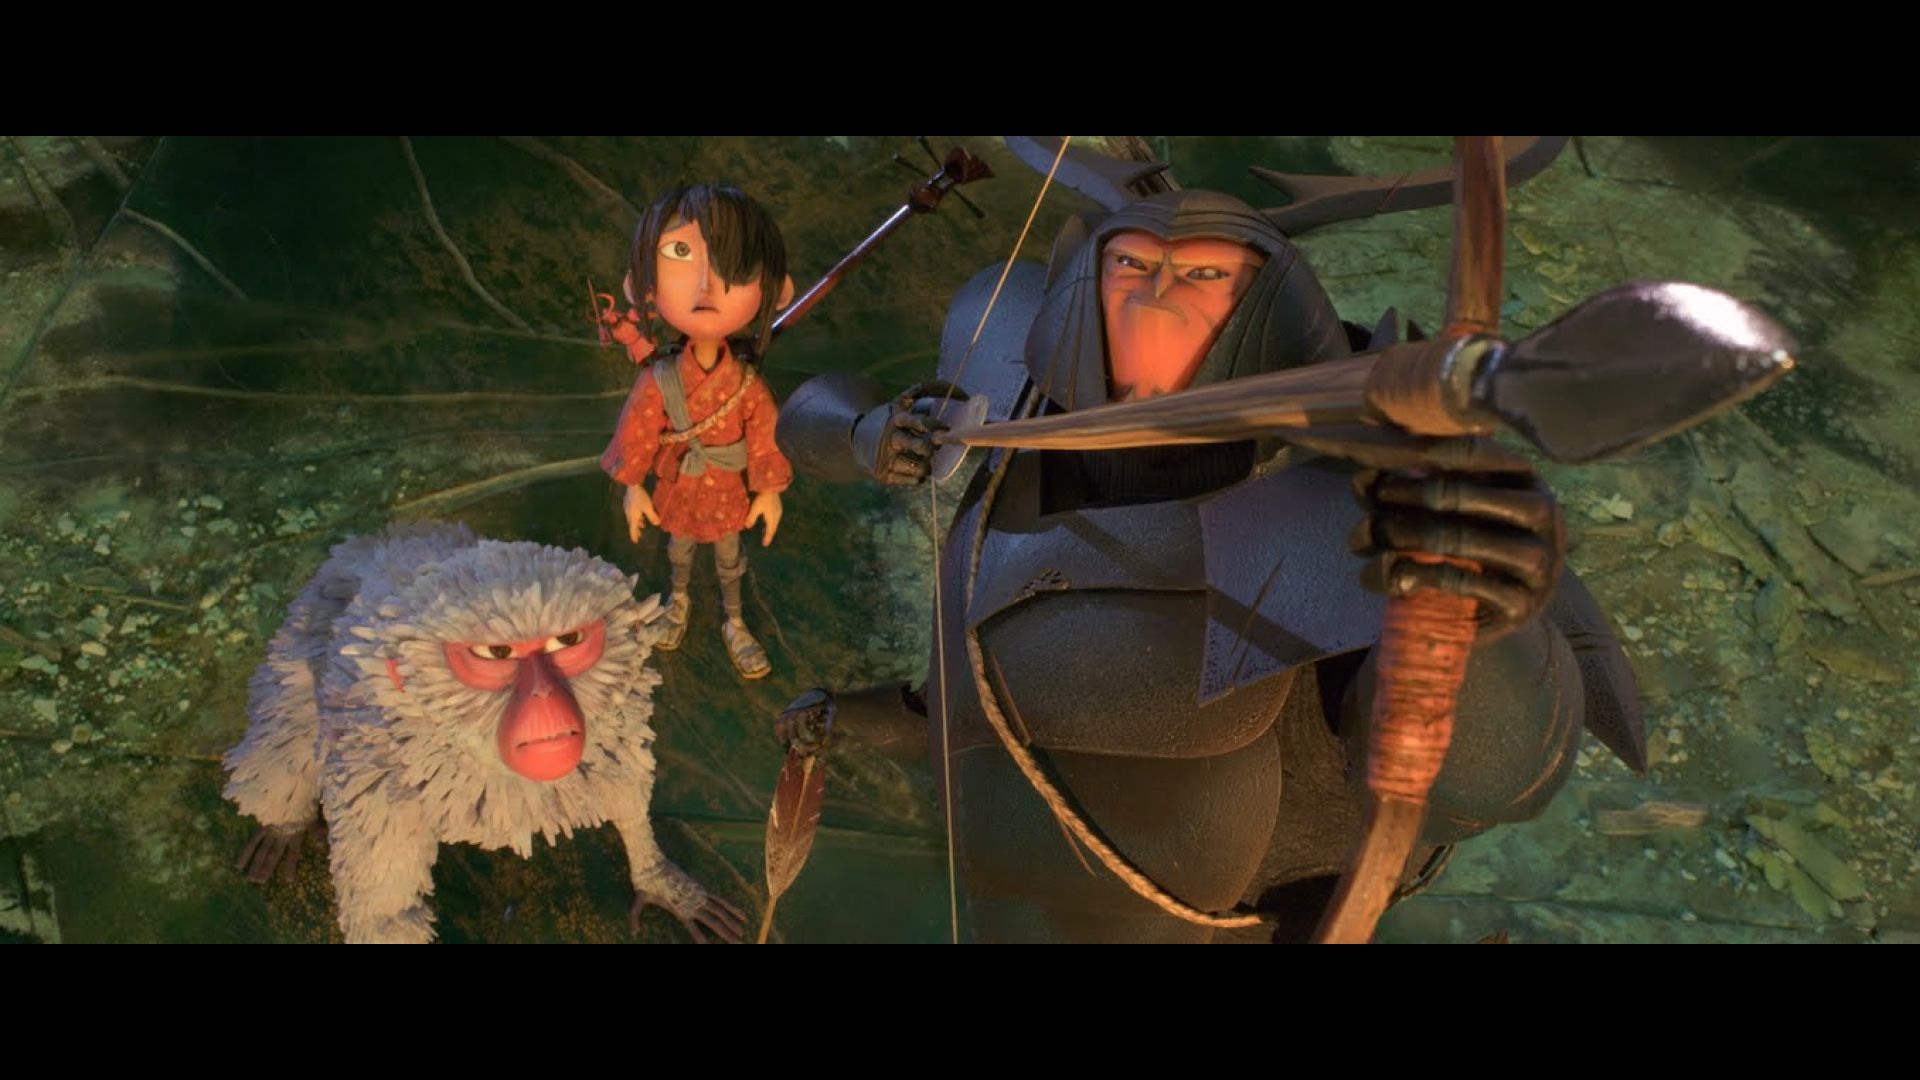 Kubo And The Two Strings Trailer In Theaters August 